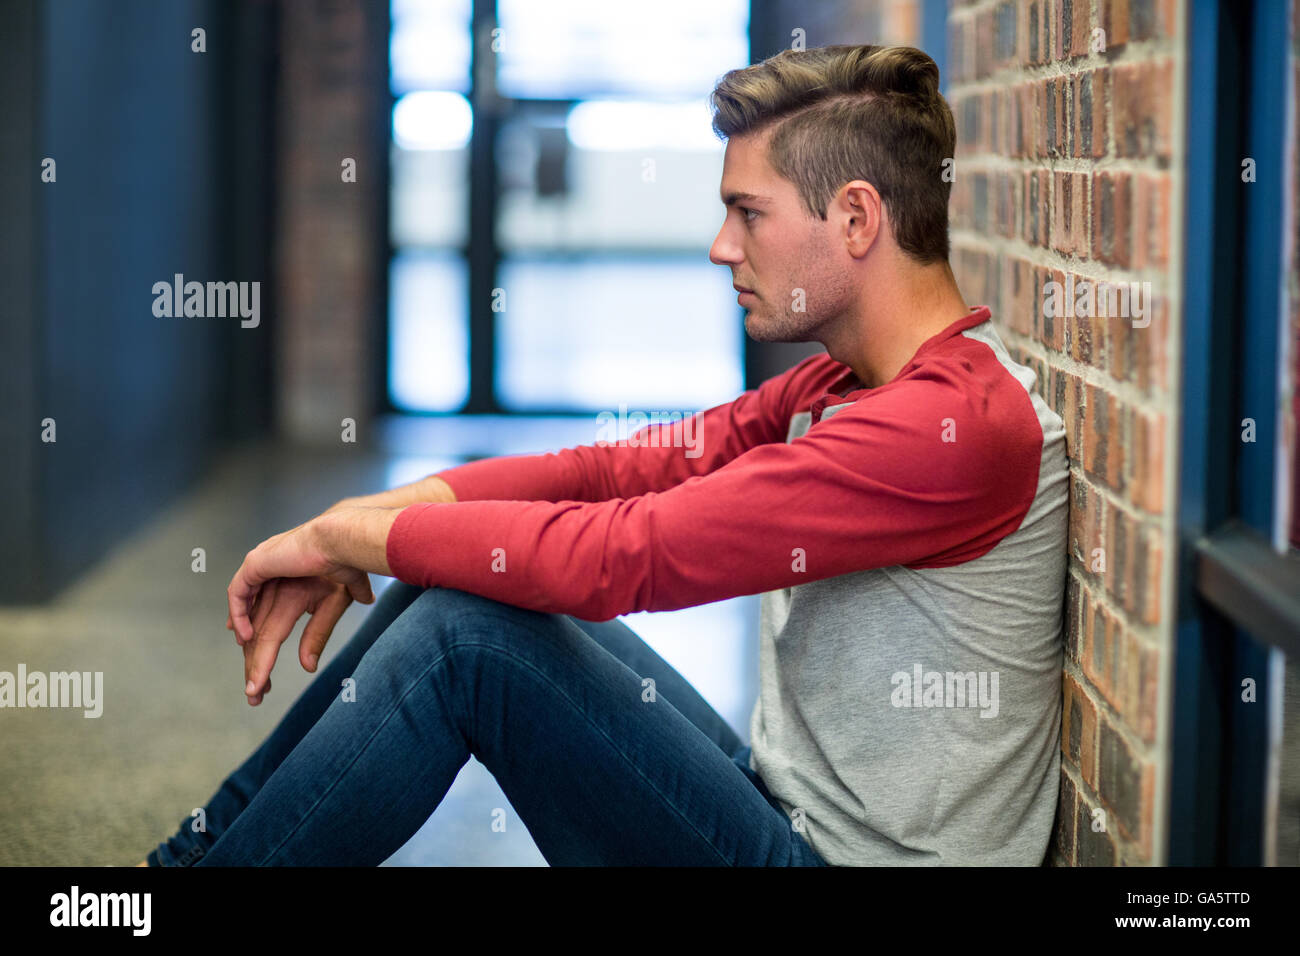 Stressed man sitting by wall Stock Photo